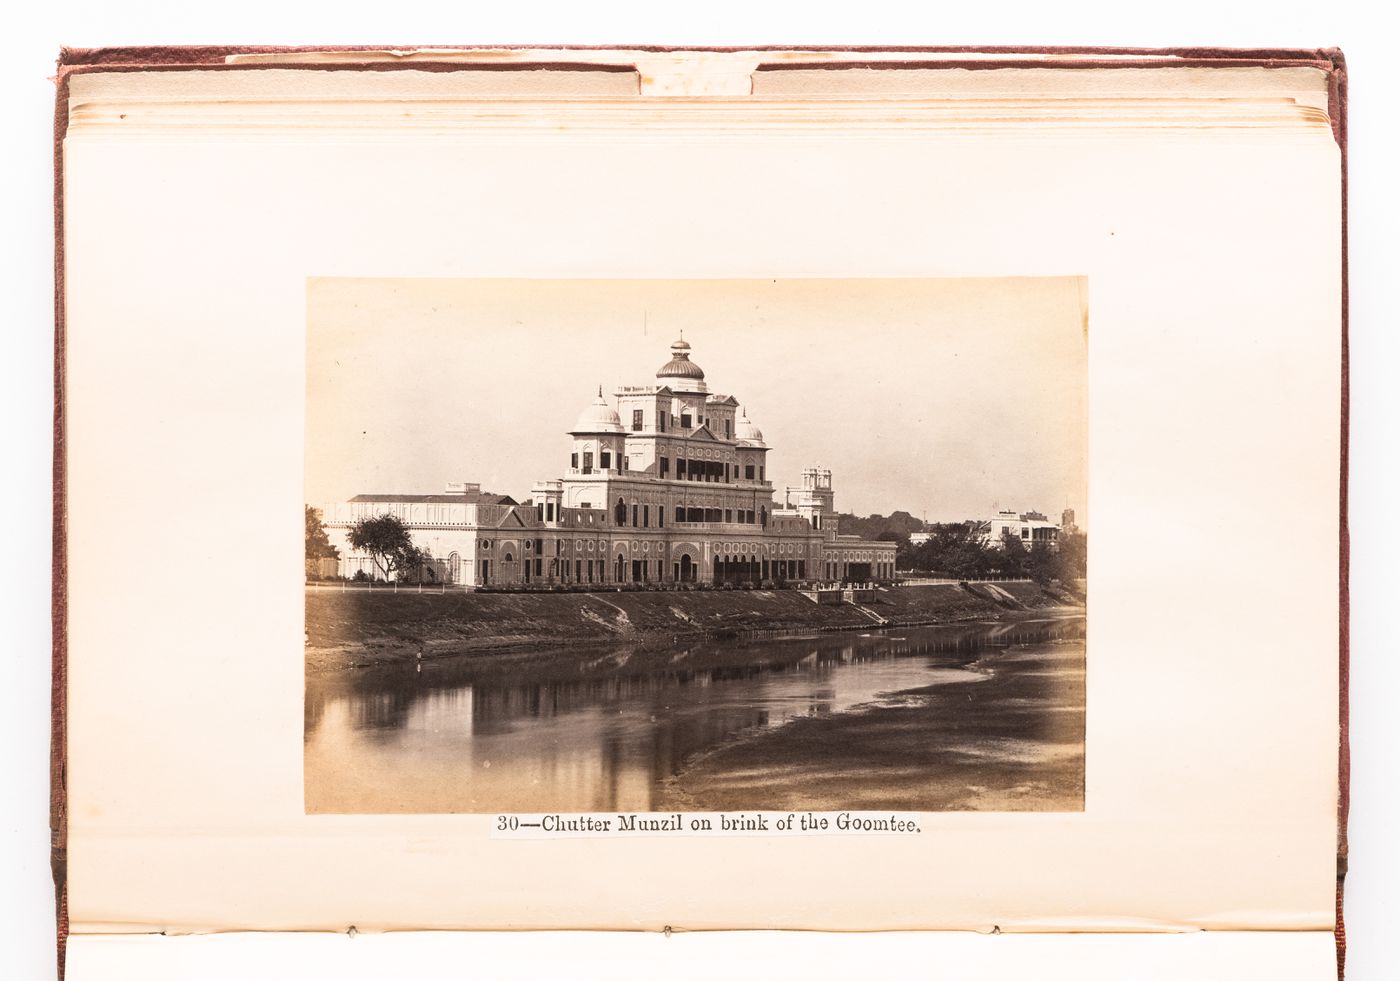 View of the Greater Chattar Manzil [Greater Umbrella Palace] from the Gumti River, Lucknow, India